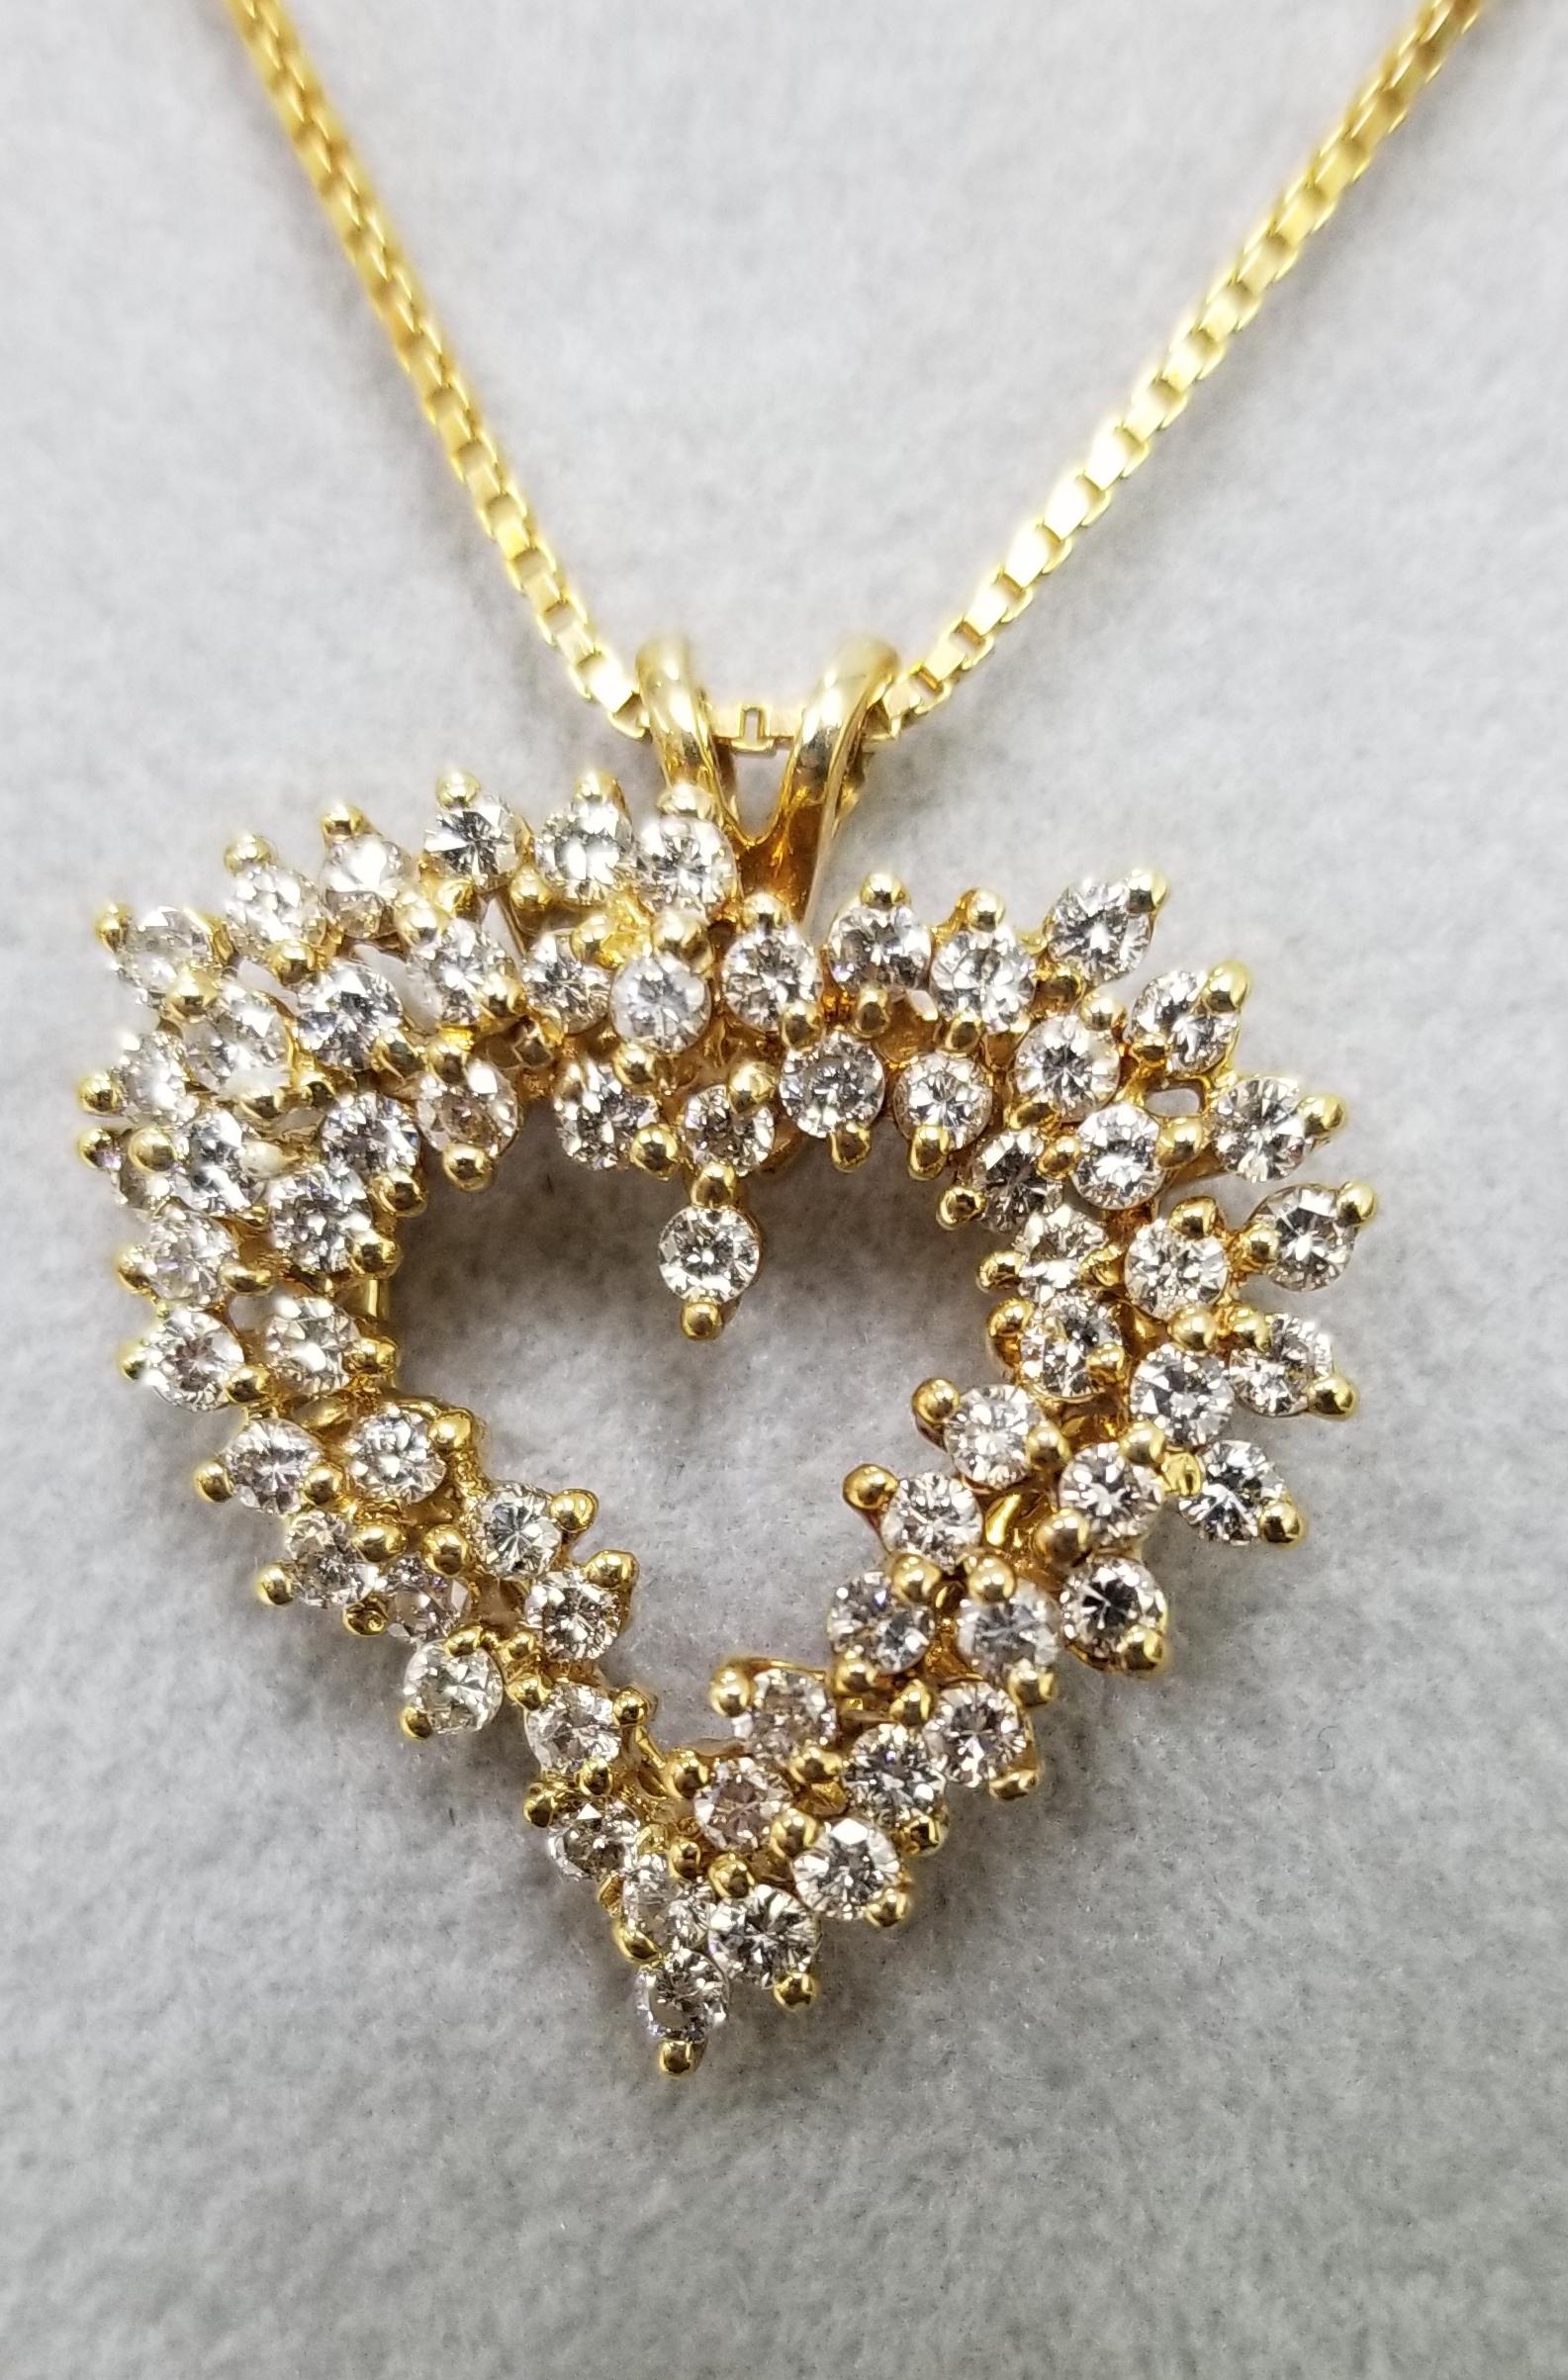 14k yellow gold diamond heart necklace, containing 64 round full cut diamonds of very fine quality weighing 1.30cts. on a 16 inch chain.